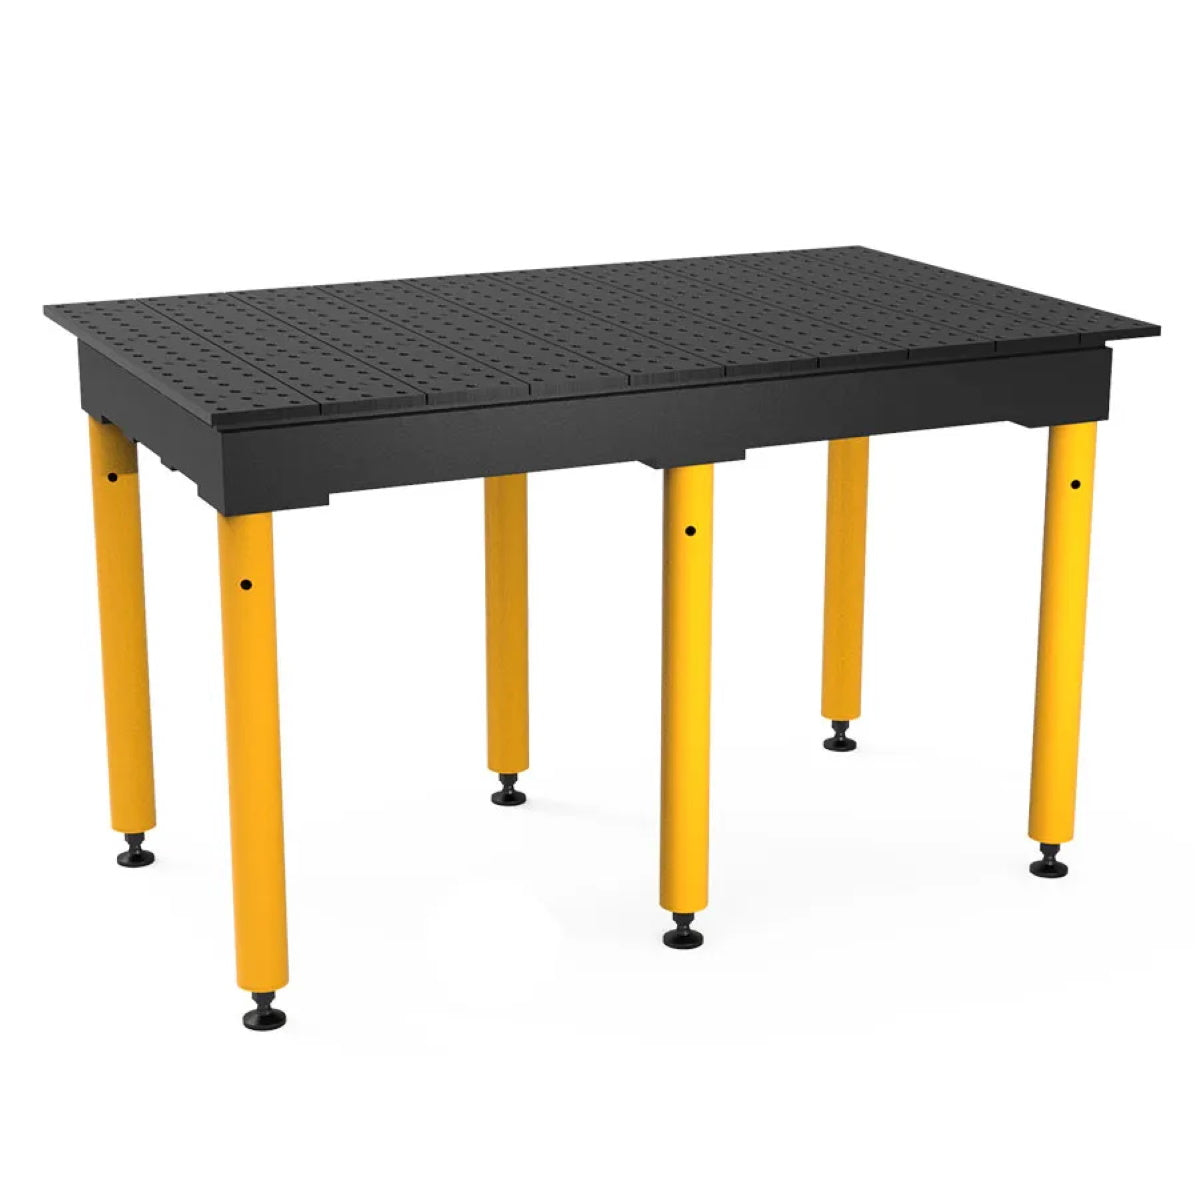 Build Pro Nitrided Max Table with Fixed Legs